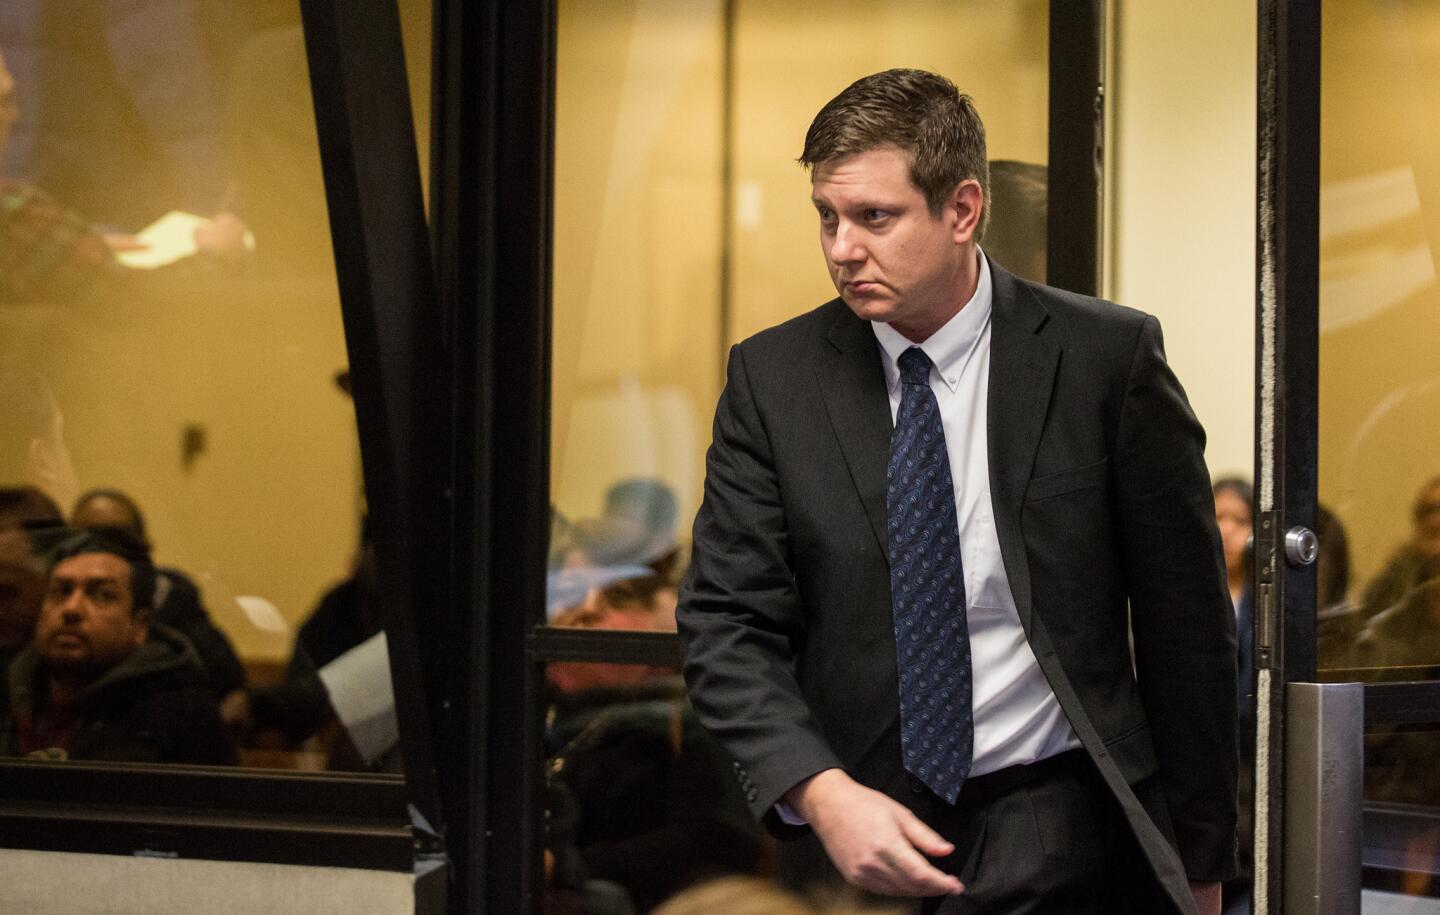 Chicago police Officer Jason Van Dyke attends a court hearing with his attorney, Daniel Herbert, at the Leighton Criminal Court Building on Dec. 18, 2015, in Chicago.